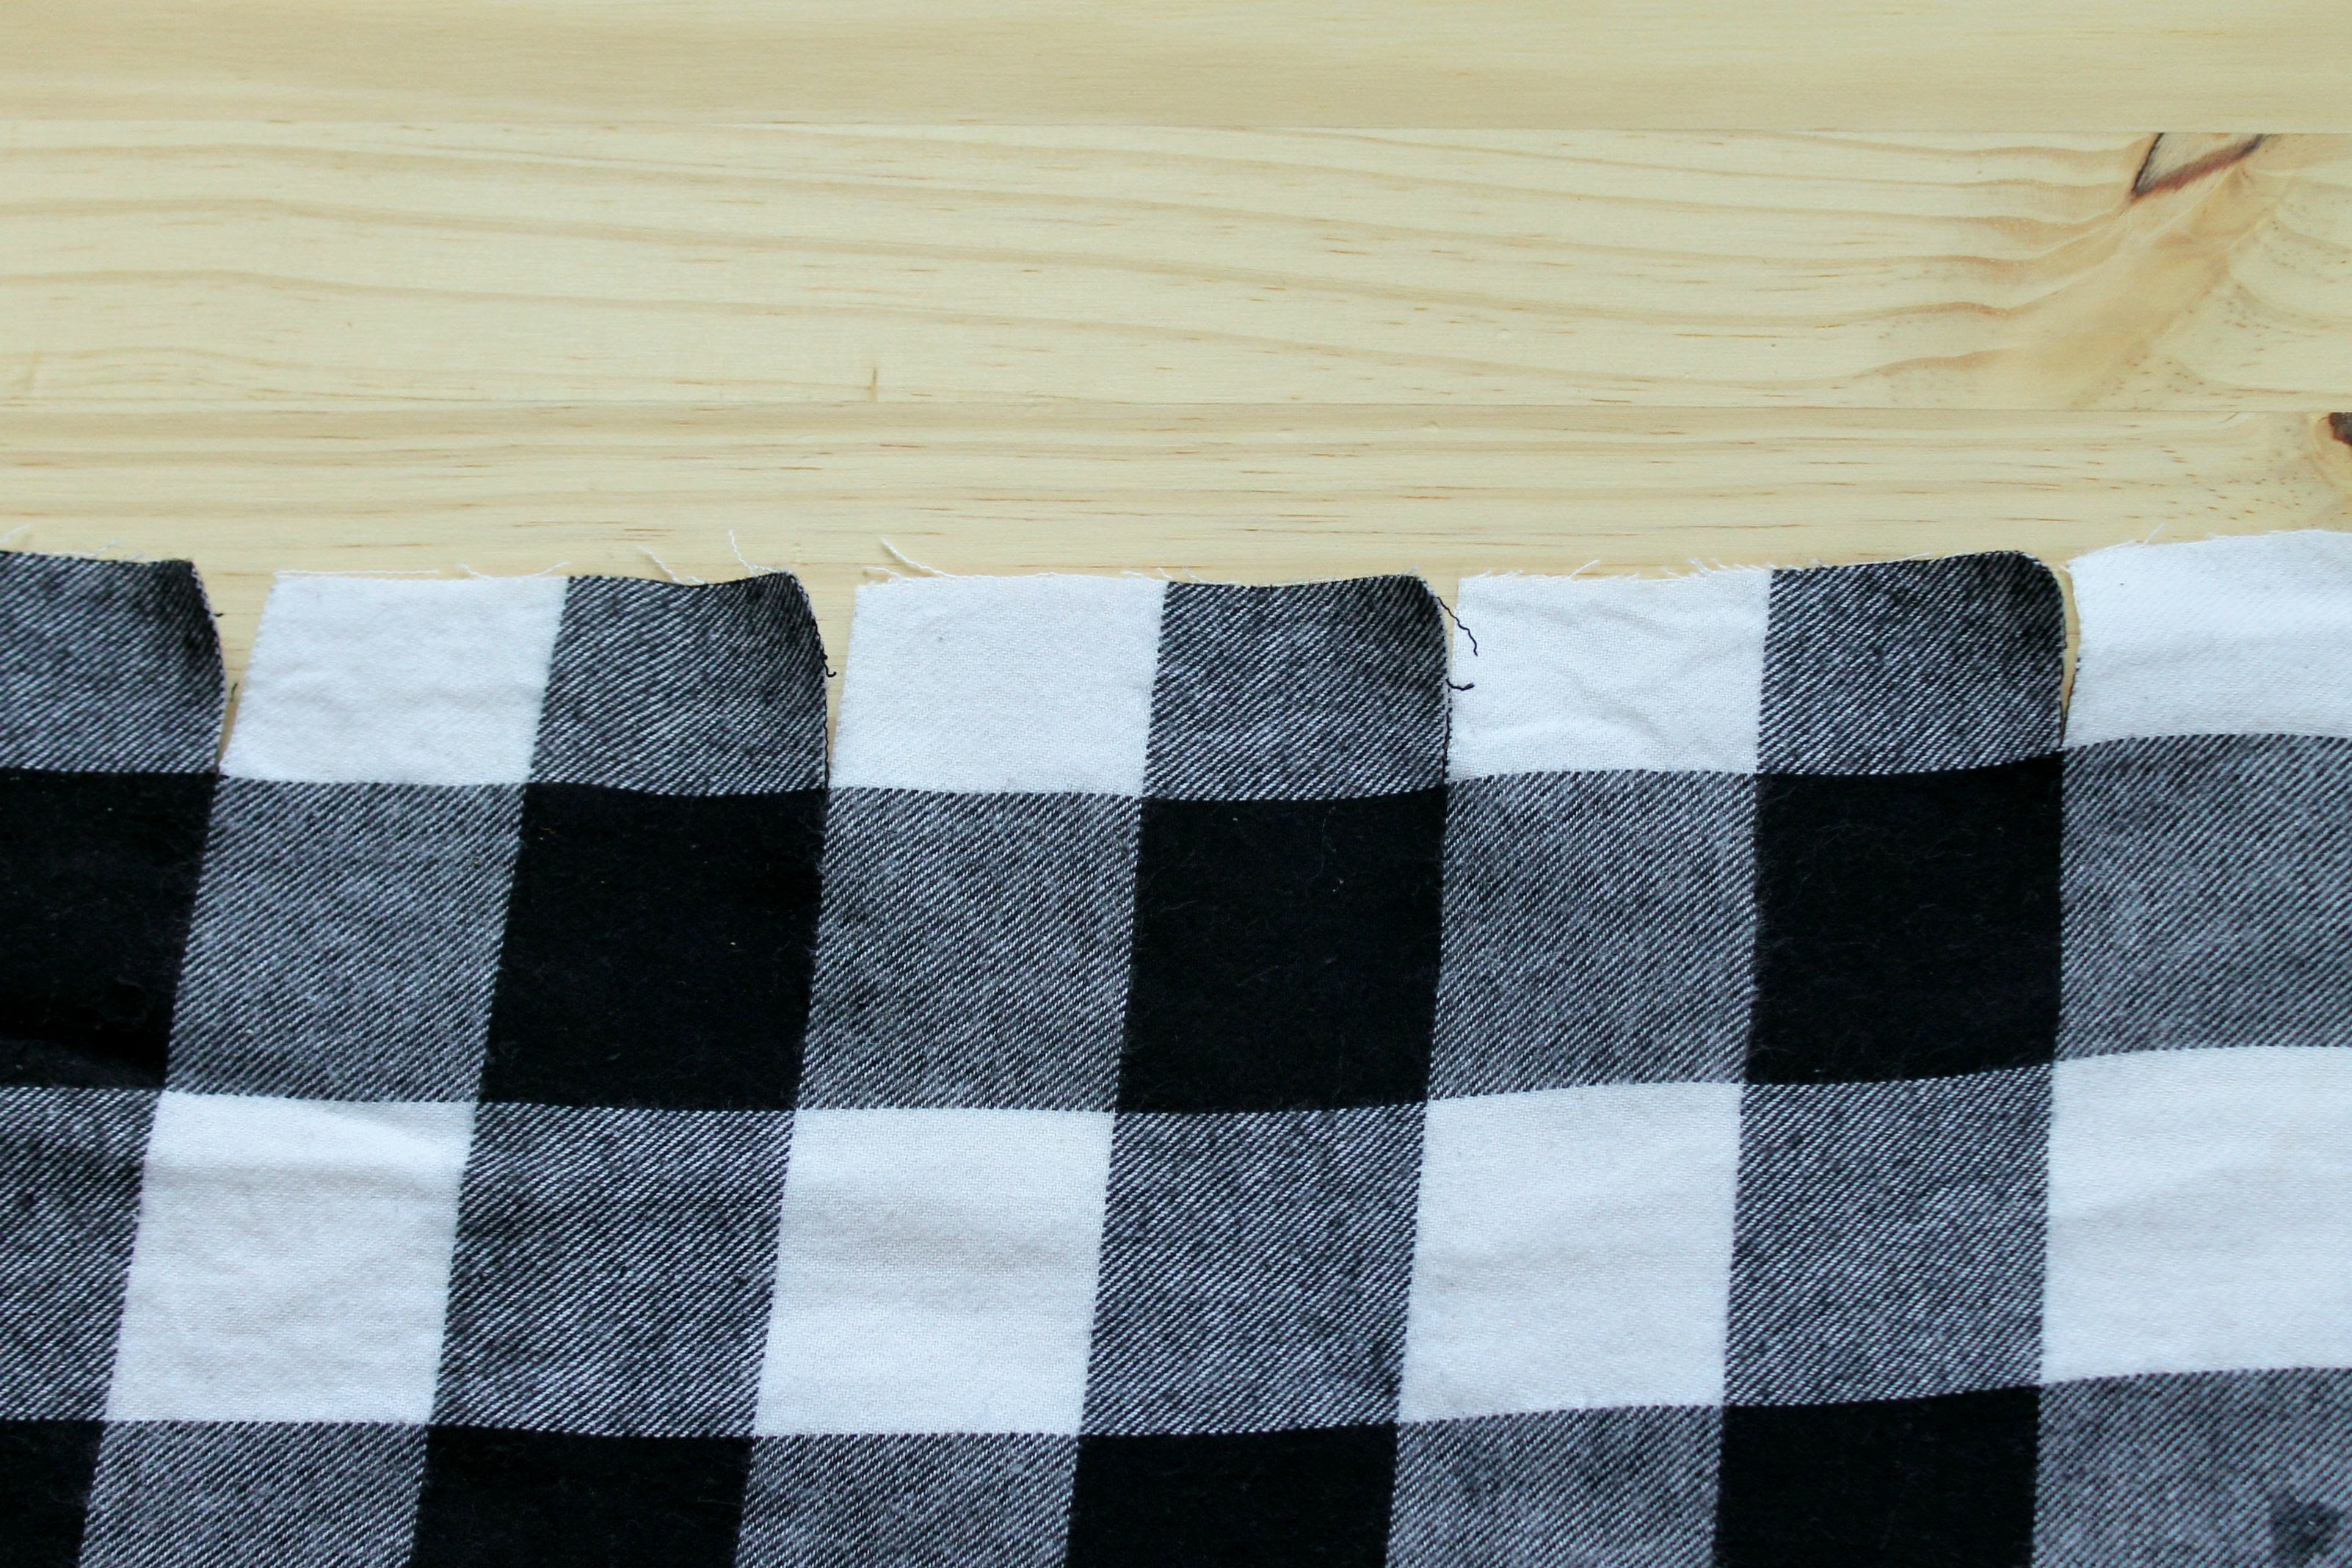 12 Days of Handmade Holiday Gifts! This no sew scarf is so easy to make and I love the buffalo plaid.